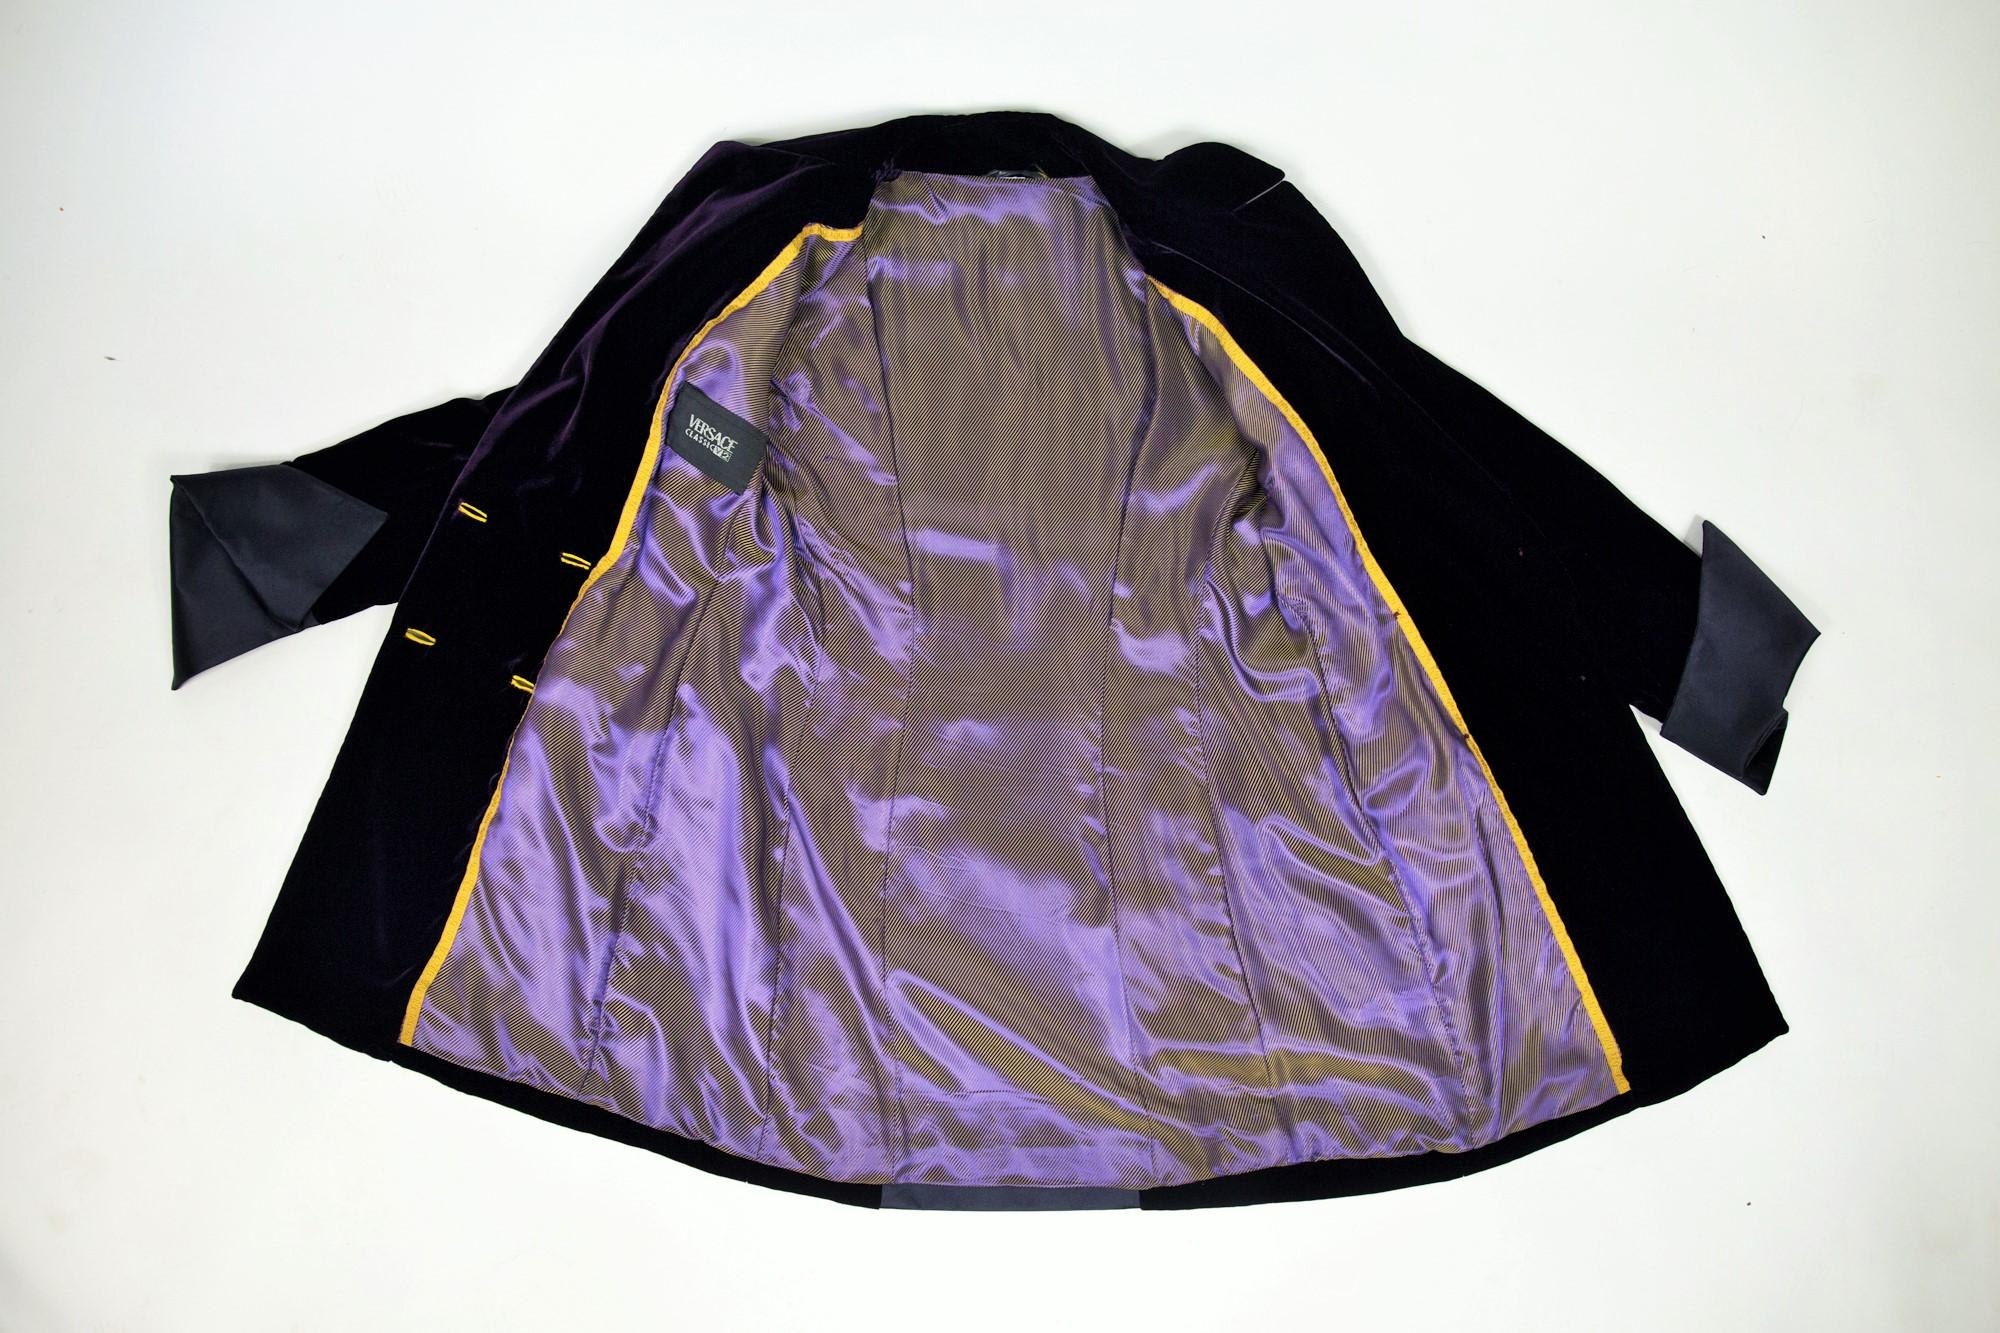 Circa 2000/2005
Italy

Beautiful evening tuxedo jacket out of purple cardinal velvet from the famous Milanese House directed by Donatella Versace. Italian chic for this long jacket with crossed sides and double breasted trimmed with yellow satin.